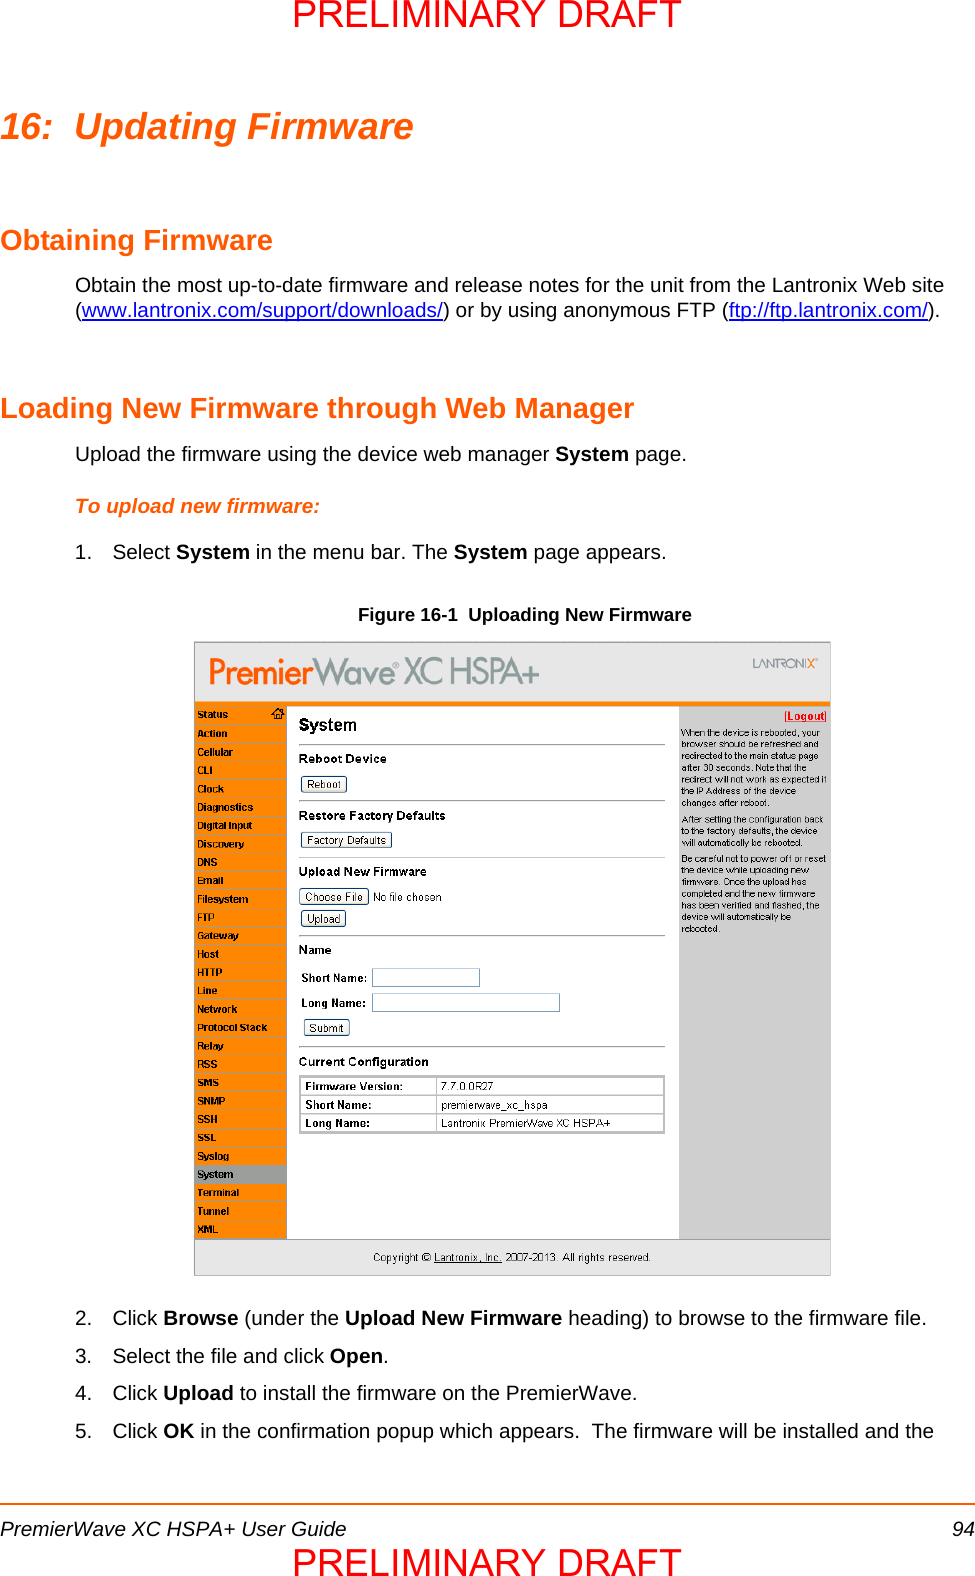 PremierWave XC HSPA+ User Guide 9416: Updating FirmwareObtaining FirmwareObtain the most up-to-date firmware and release notes for the unit from the Lantronix Web site (www.lantronix.com/support/downloads/) or by using anonymous FTP (ftp://ftp.lantronix.com/).Loading New Firmware through Web ManagerUpload the firmware using the device web manager System page.To upload new firmware:1. Select System in the menu bar. The System page appears.Figure 16-1  Uploading New Firmware2. Click Browse (under the Upload New Firmware heading) to browse to the firmware file.3. Select the file and click Open.4. Click Upload to install the firmware on the PremierWave. 5. Click OK in the confirmation popup which appears.  The firmware will be installed and the PRELIMINARY DRAFTPRELIMINARY DRAFT